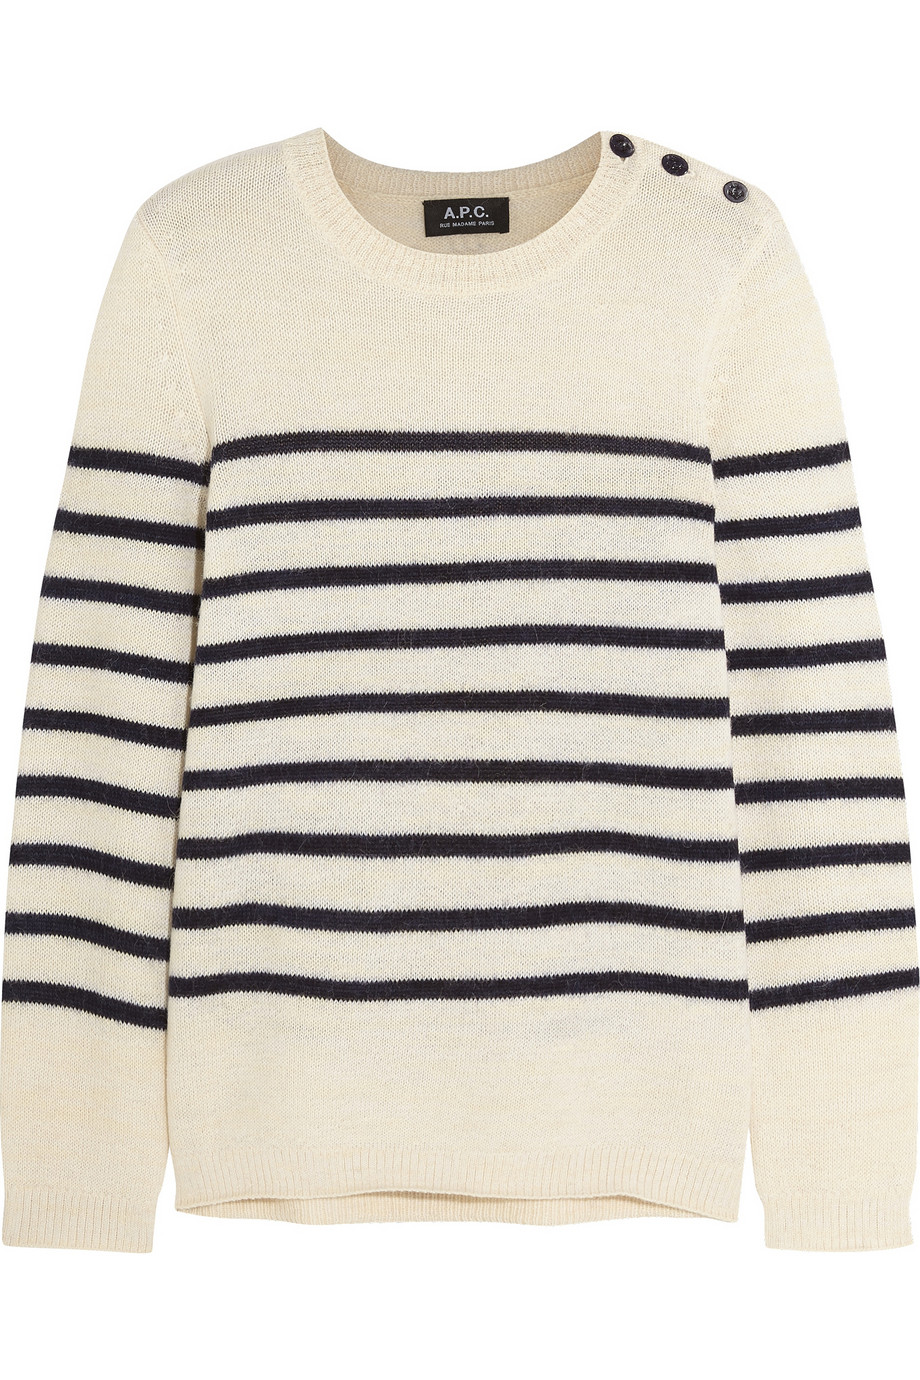 Shopping: Striped Sweaters & Perfect Totes